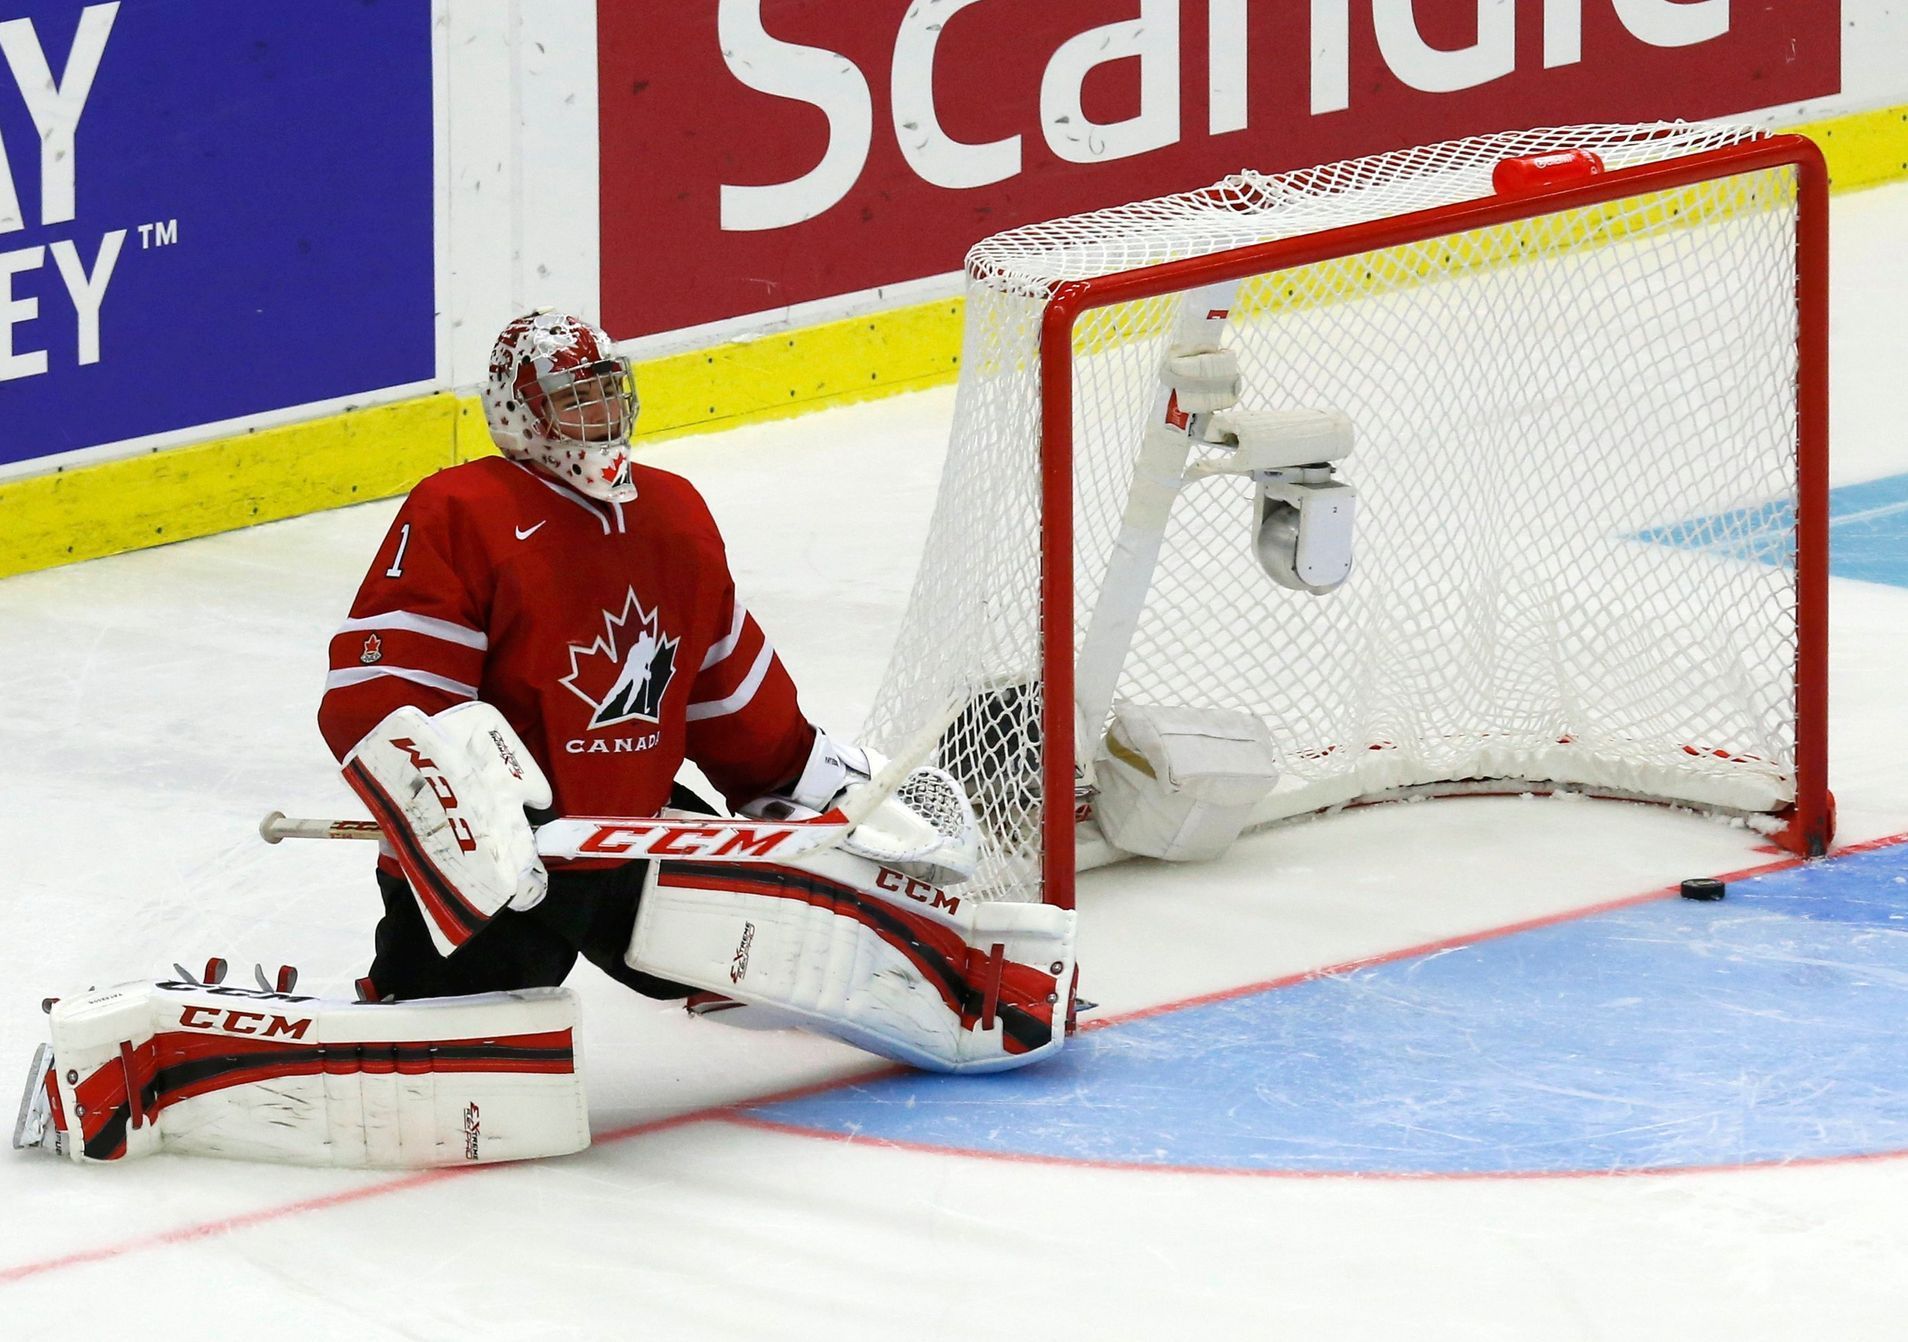 Canada's goalie Paterson reacts after giving up the game winning goal to the Czech Republic's Simon during a shootout in their IIHF World Junior Championship ice hockey game in Malmo